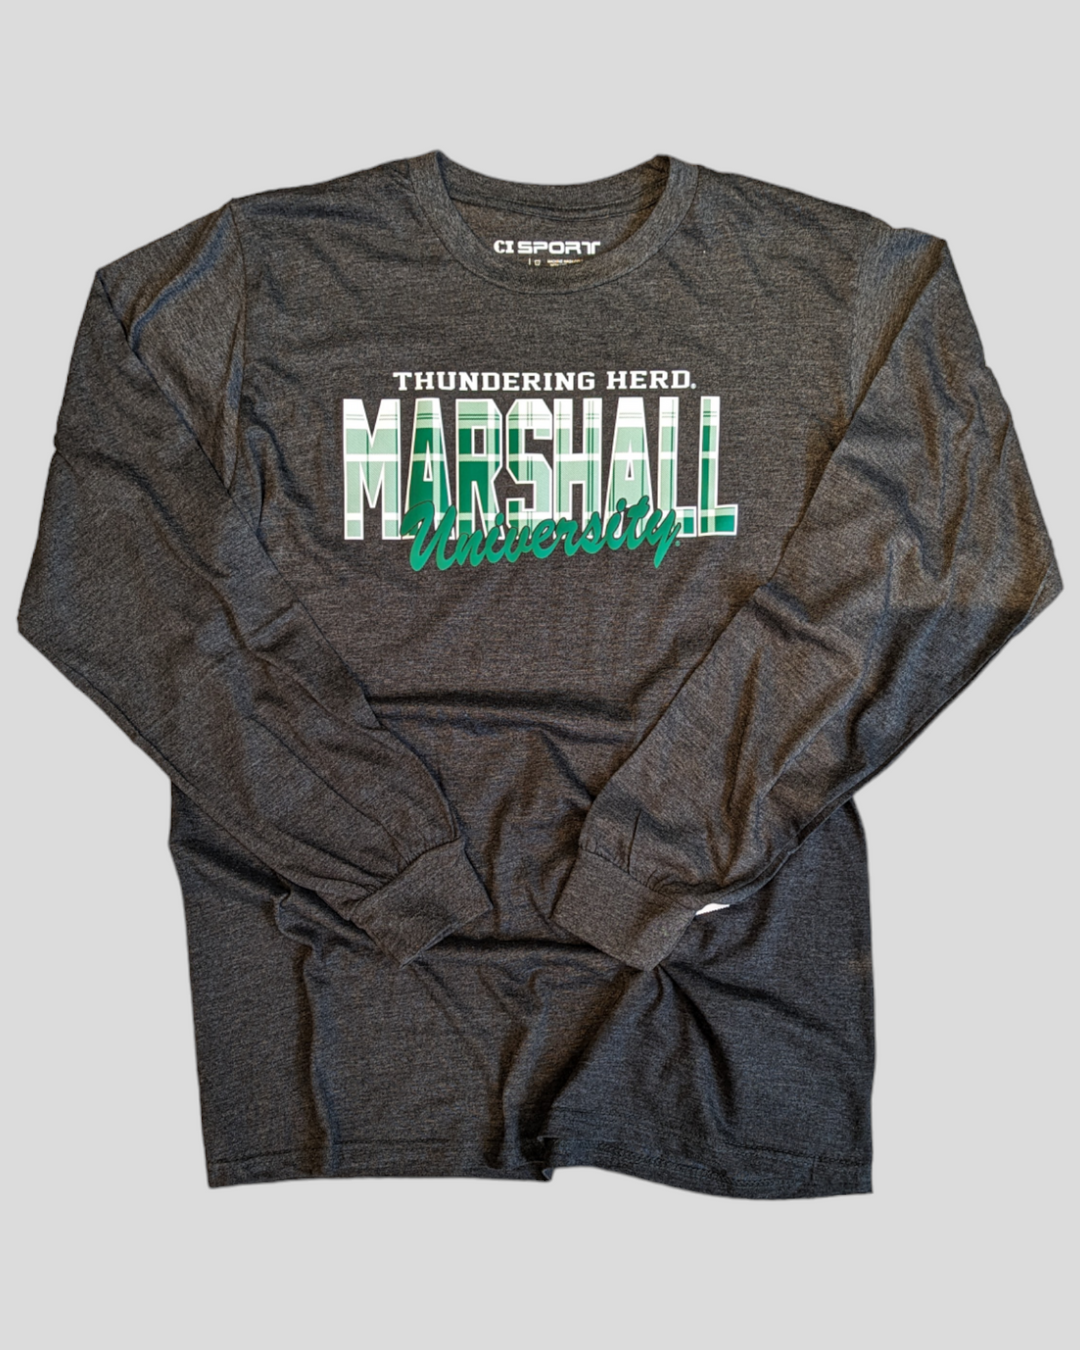 the shirt is shown in a flat lay and shows the word Marshall in plaid with University in solid green  with Thundering Herd in solid white block letters over top of the design